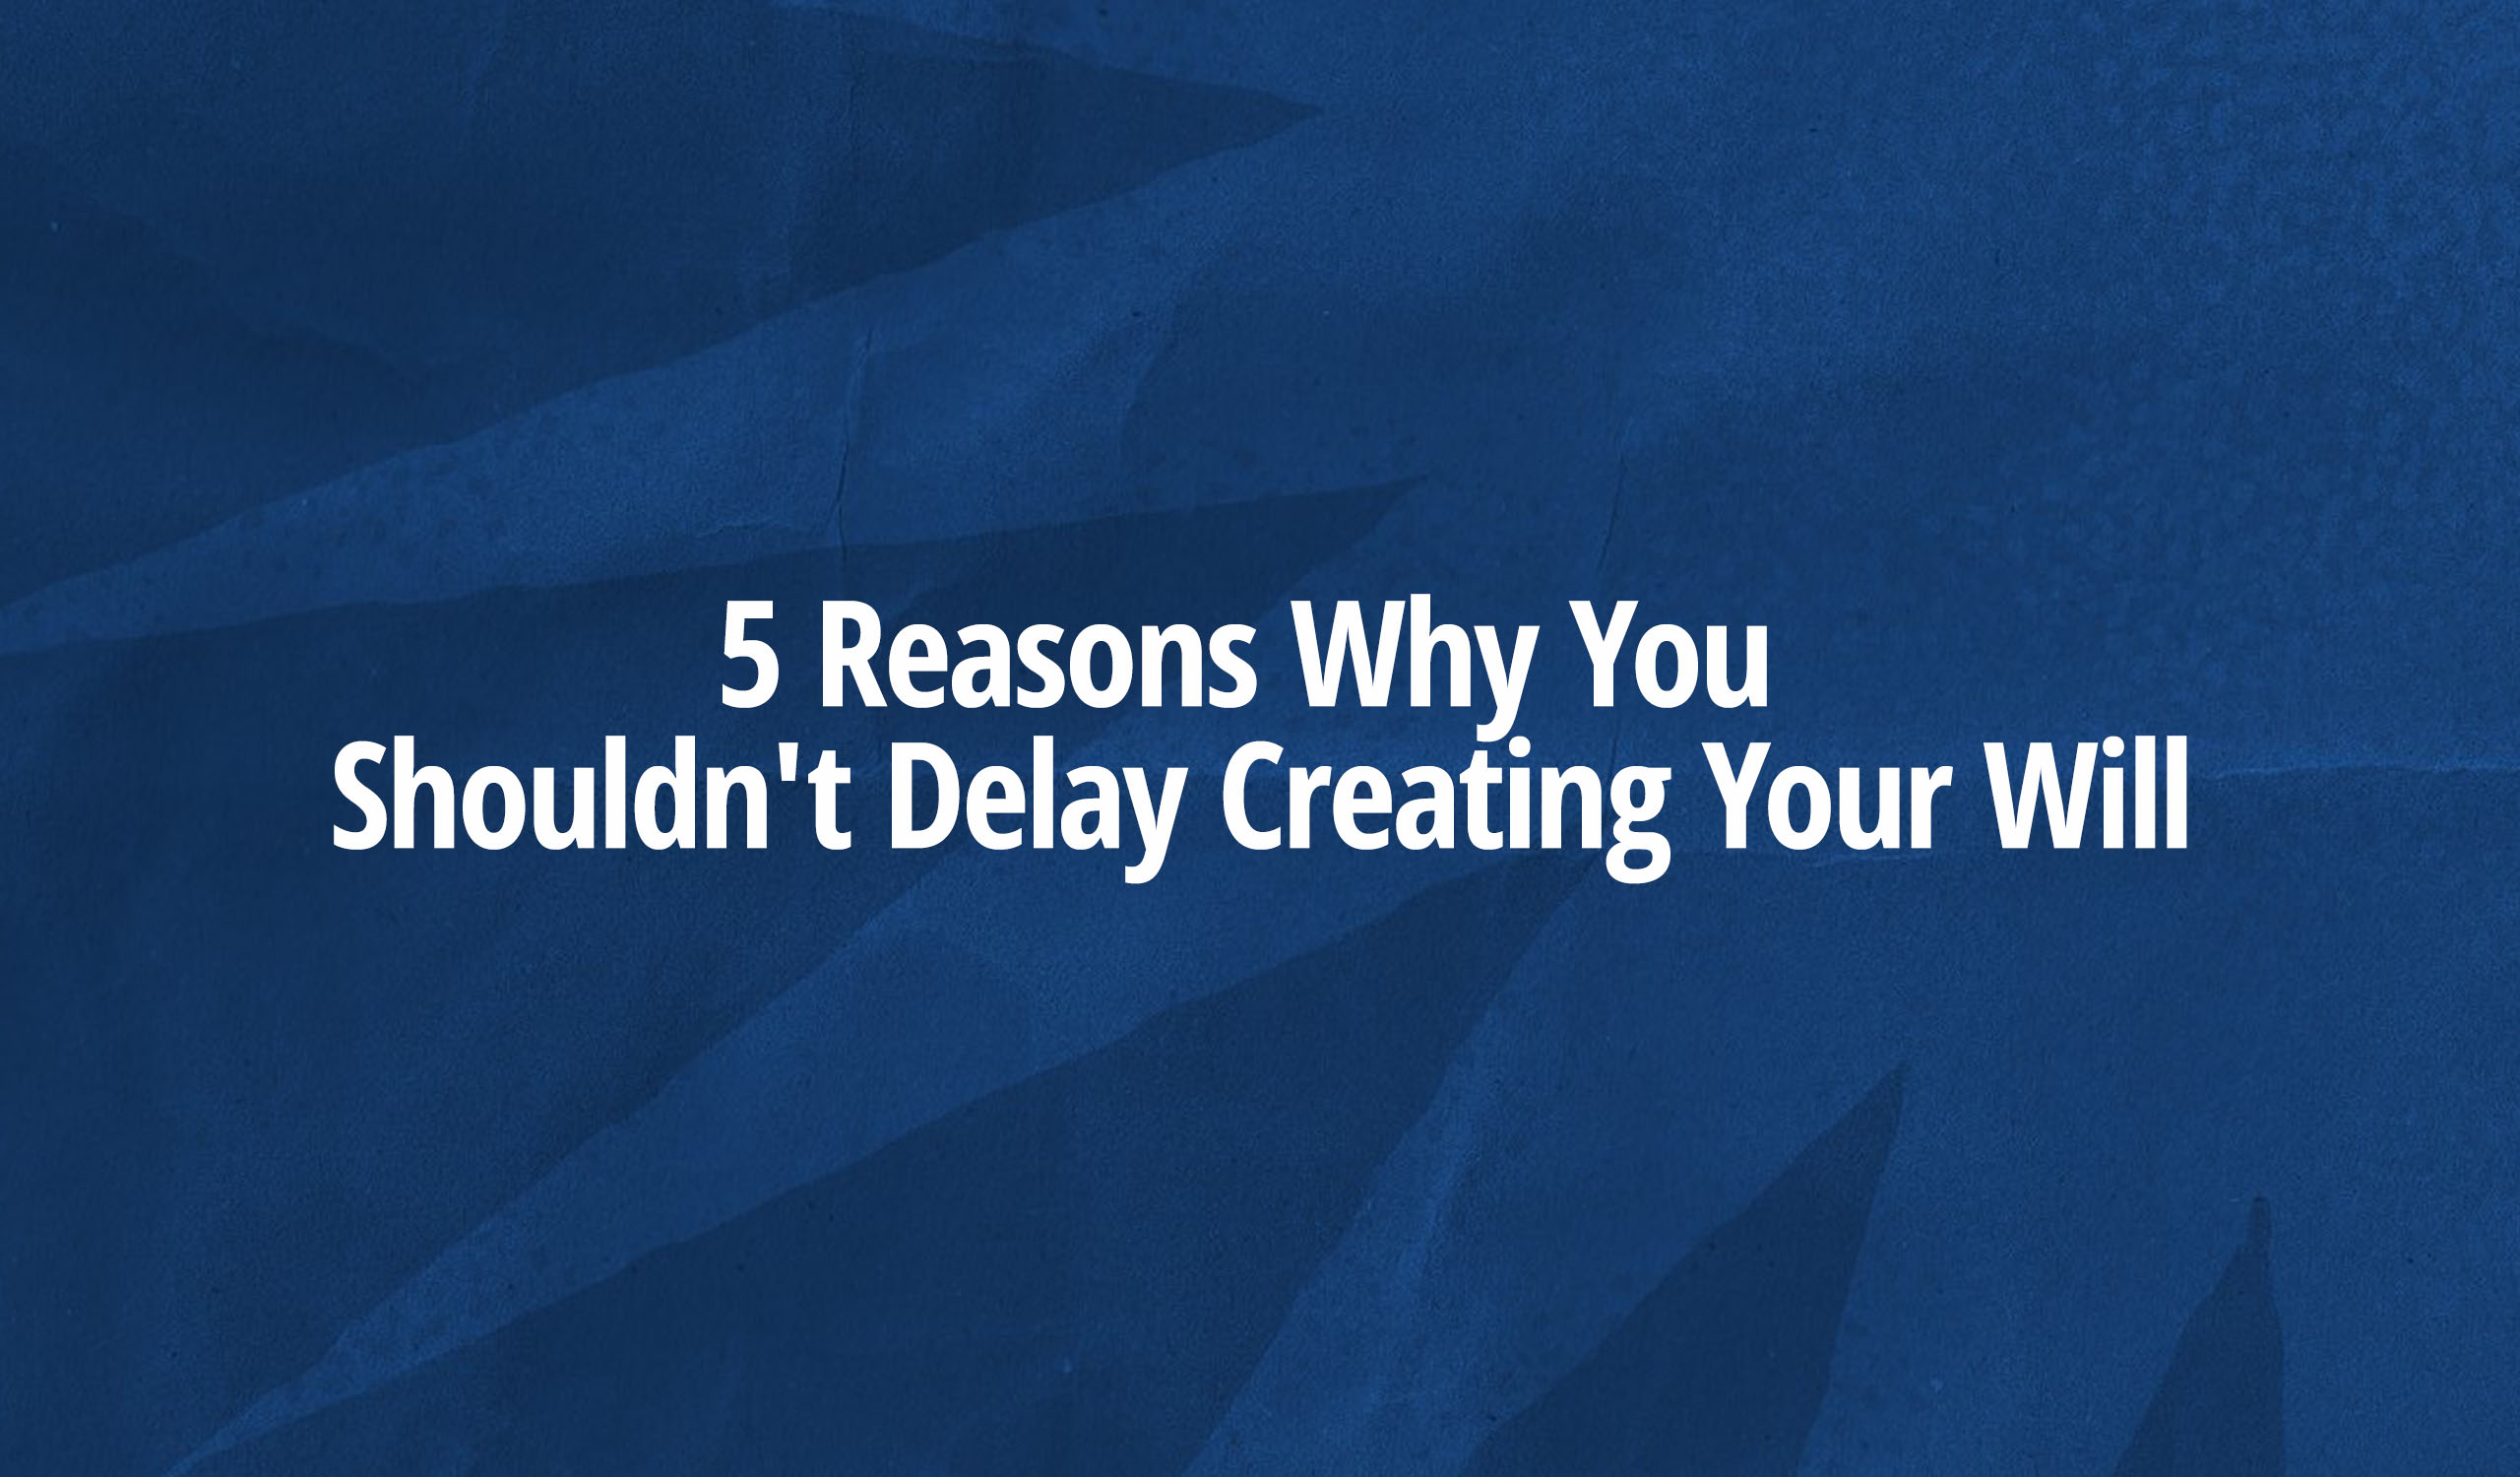 5 Reasons Why You Shouldn’t Delay Creating Your Will